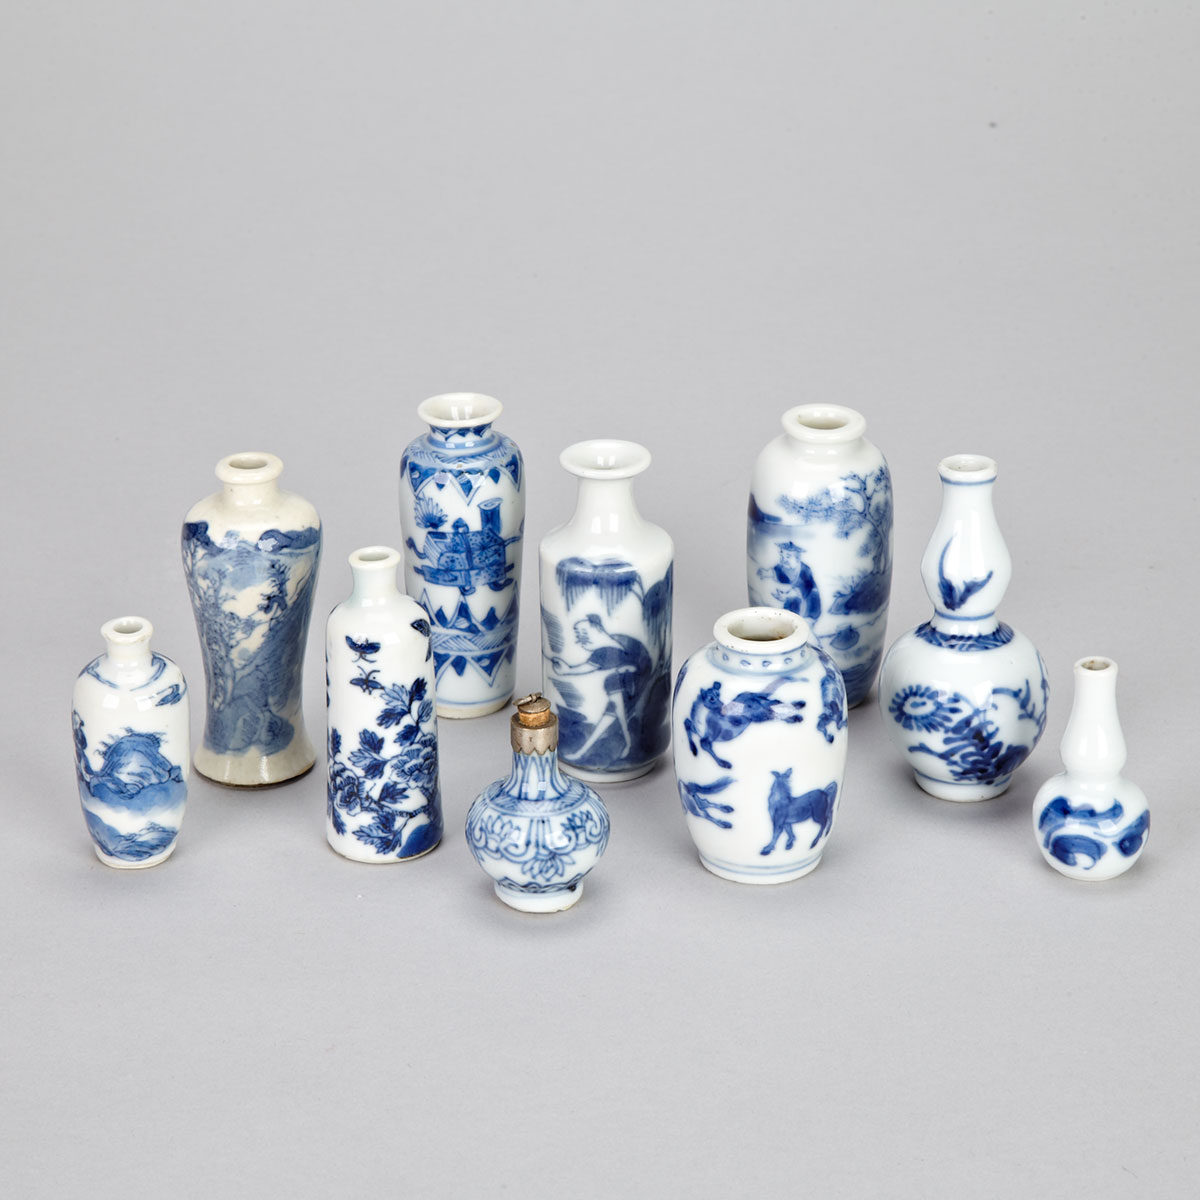 Group of Ten Blue and White Miniature Jarlets, 18th/19th Century